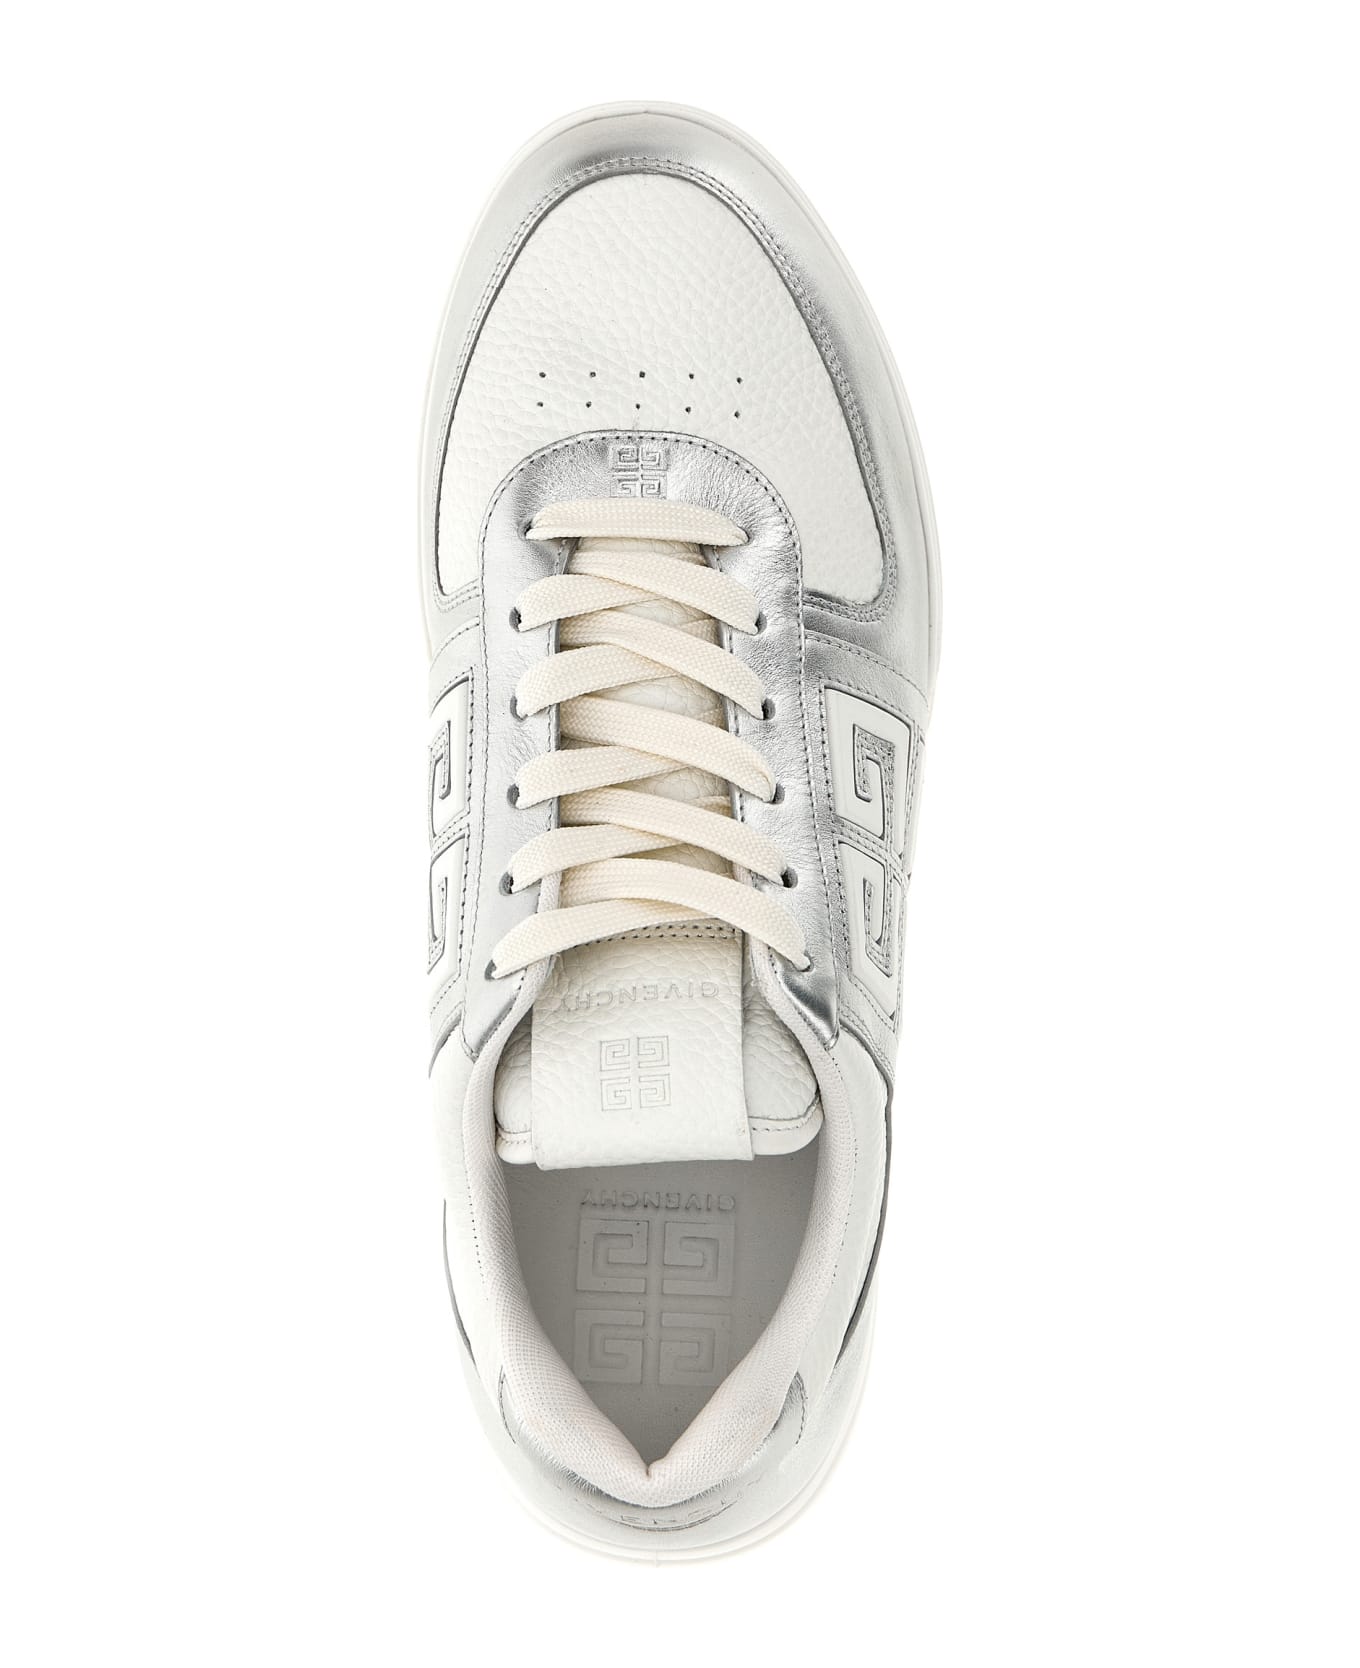 Givenchy G4 Low-top Sneaker - SILVER